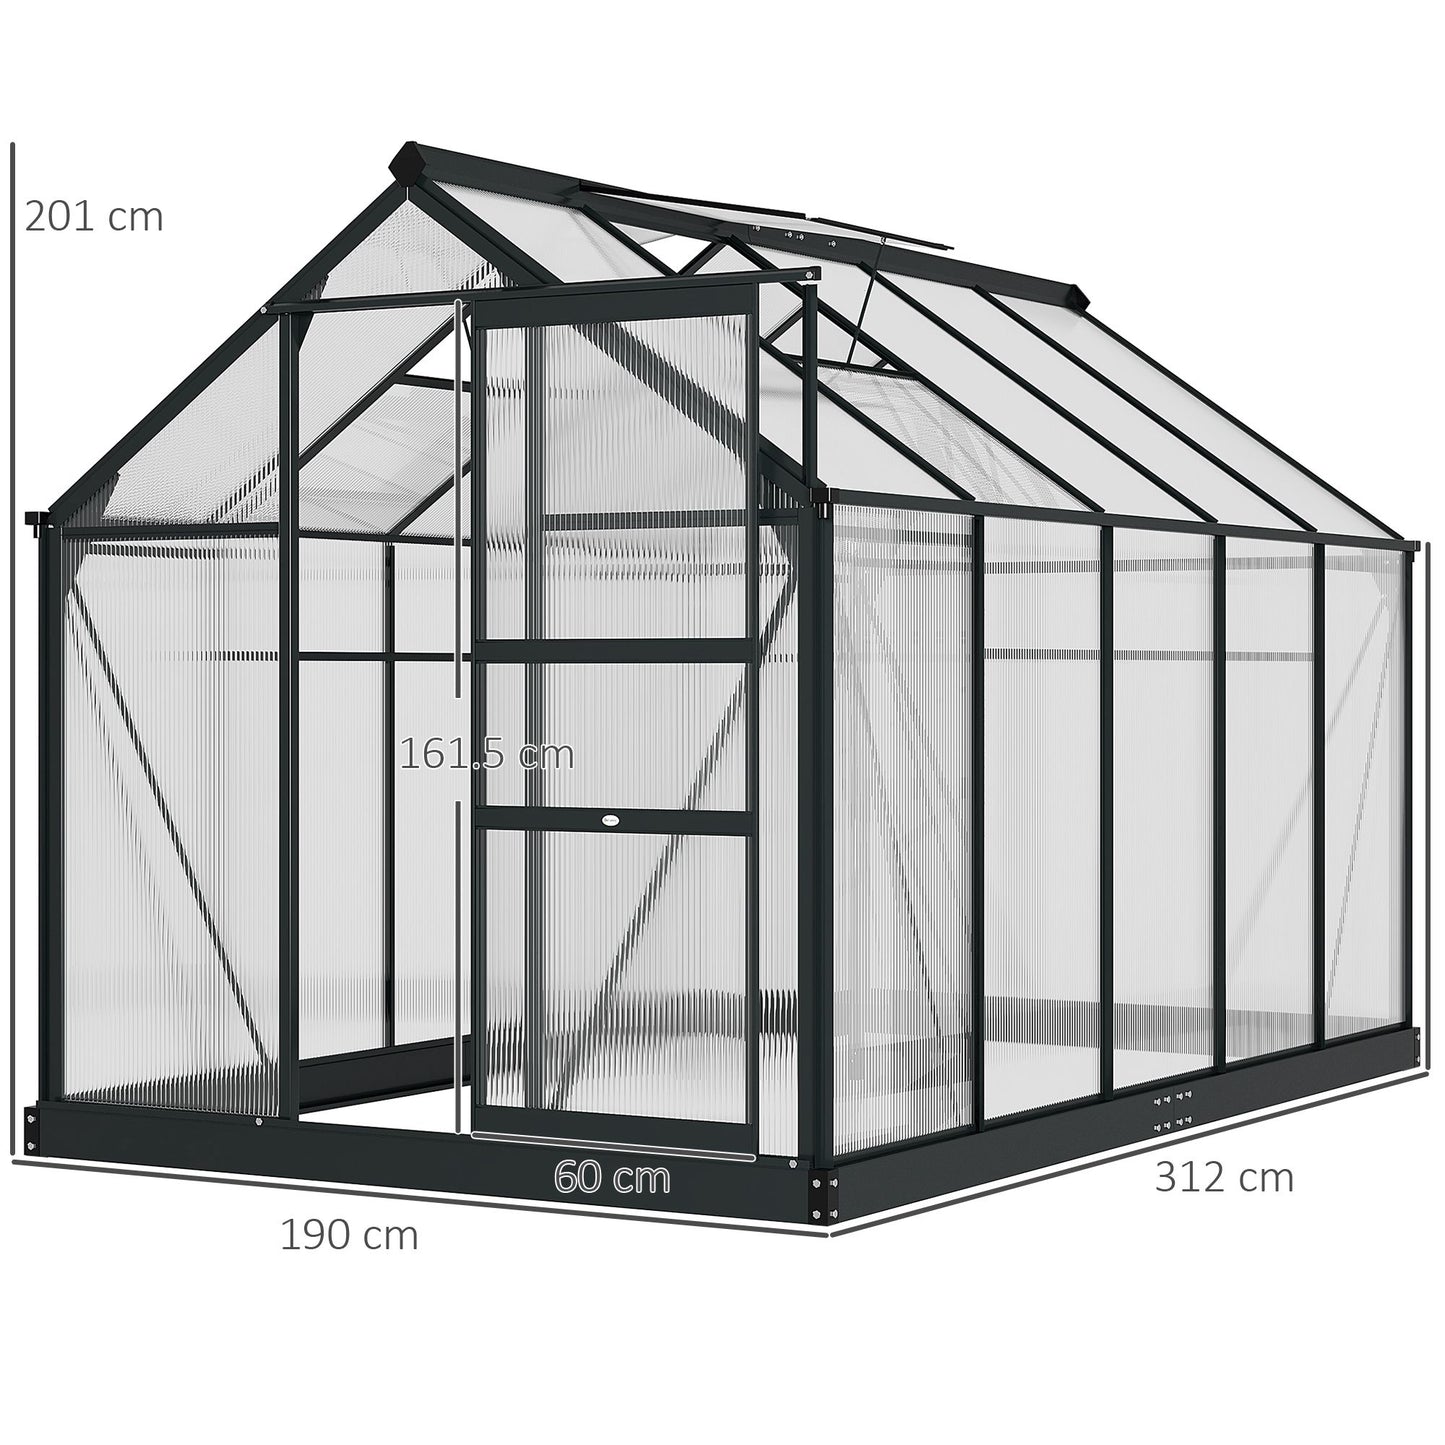 Outsunny Large Walk-In Greenhouse, Polycarbonate with Galvanised Base, 6 x 10ft, Aluminium Frame